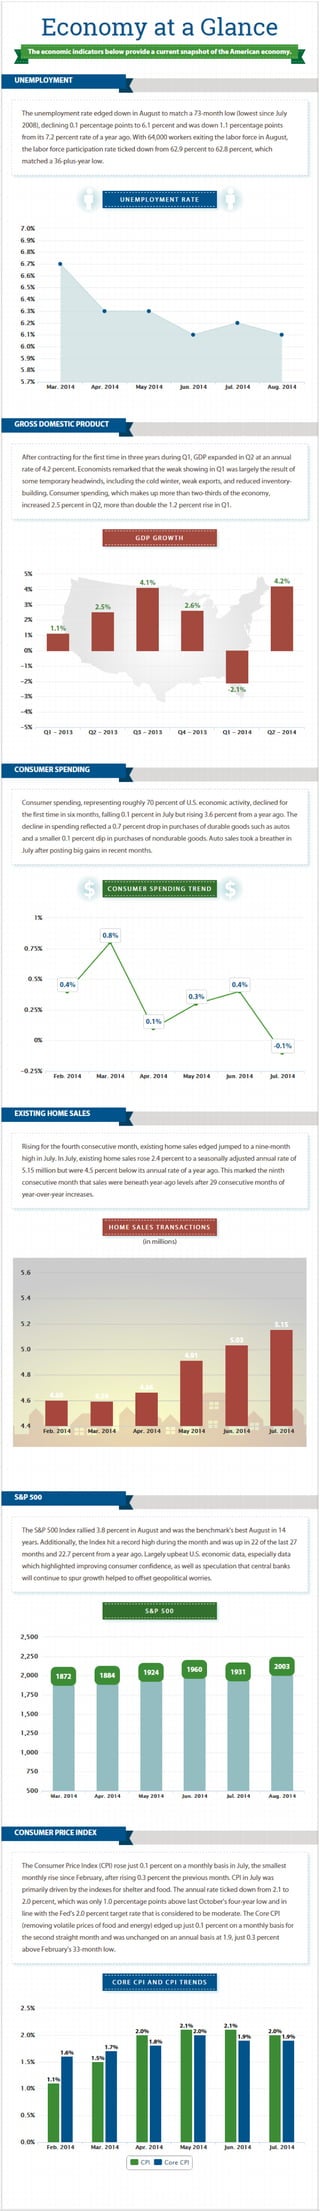 Economy at a Glance: September 2014 [Infographic]